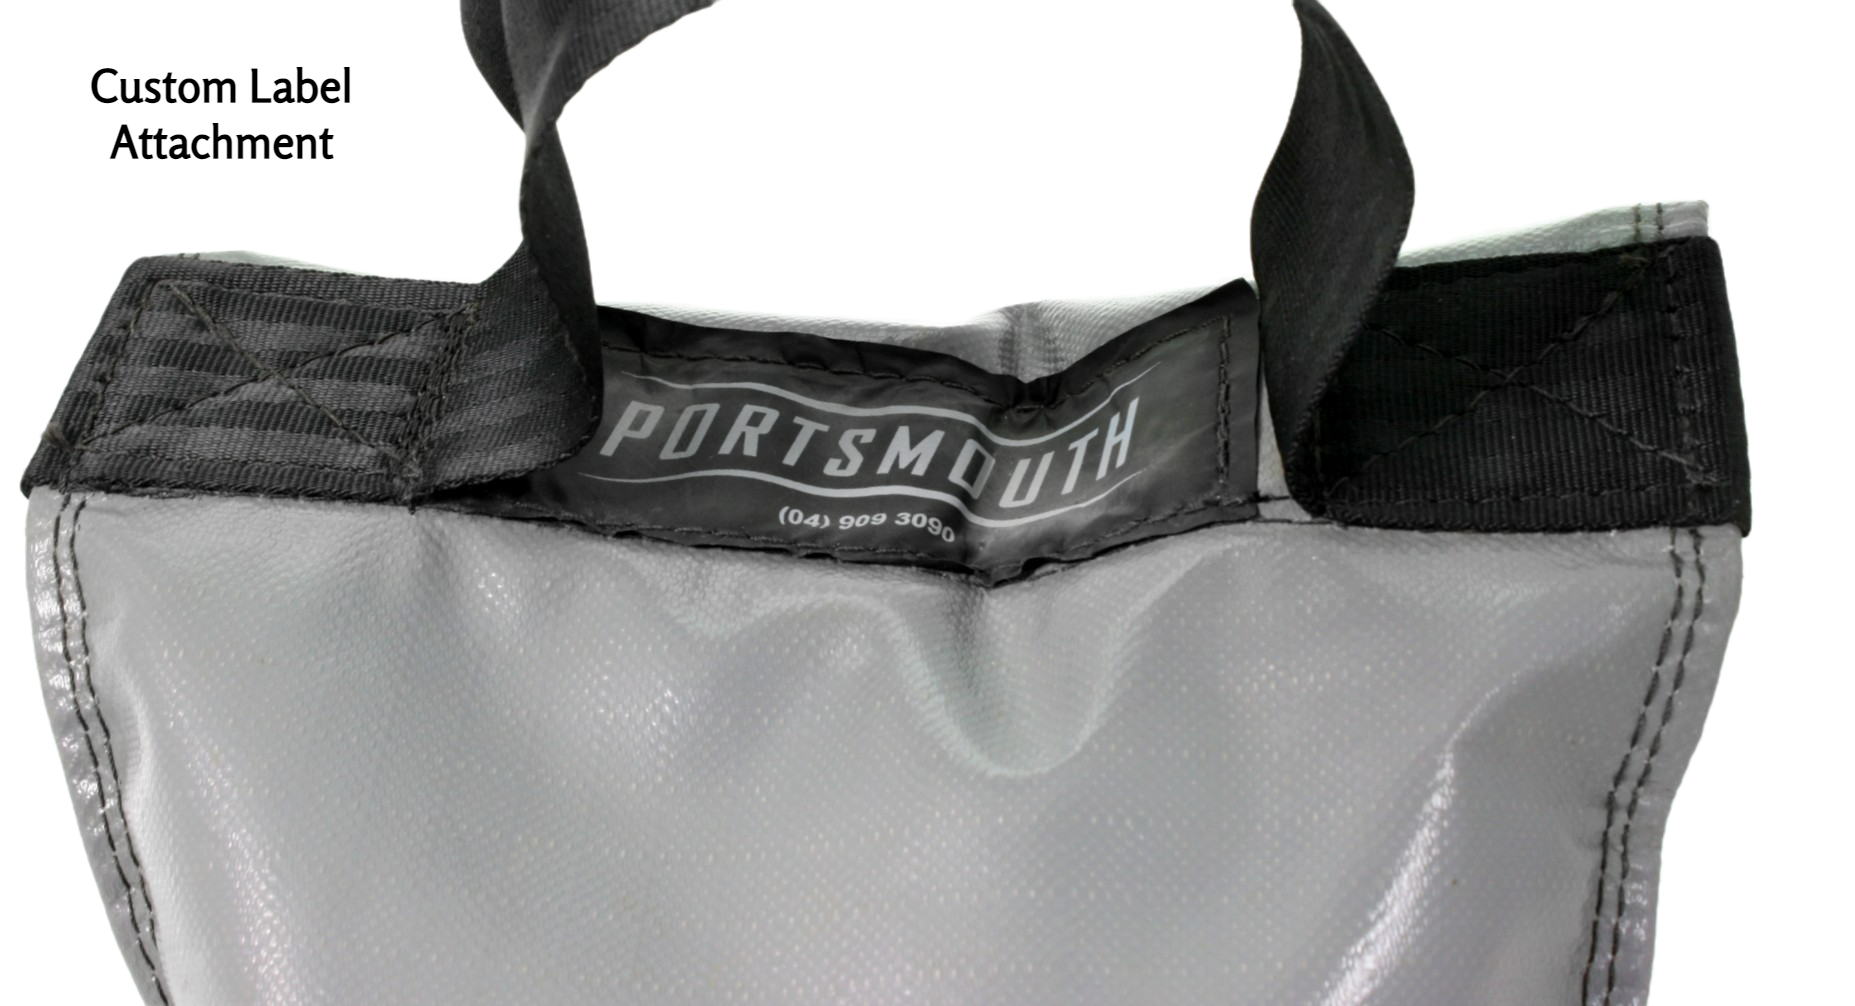 A custom label attachment, at the top of the sandbag, between the handle anchors